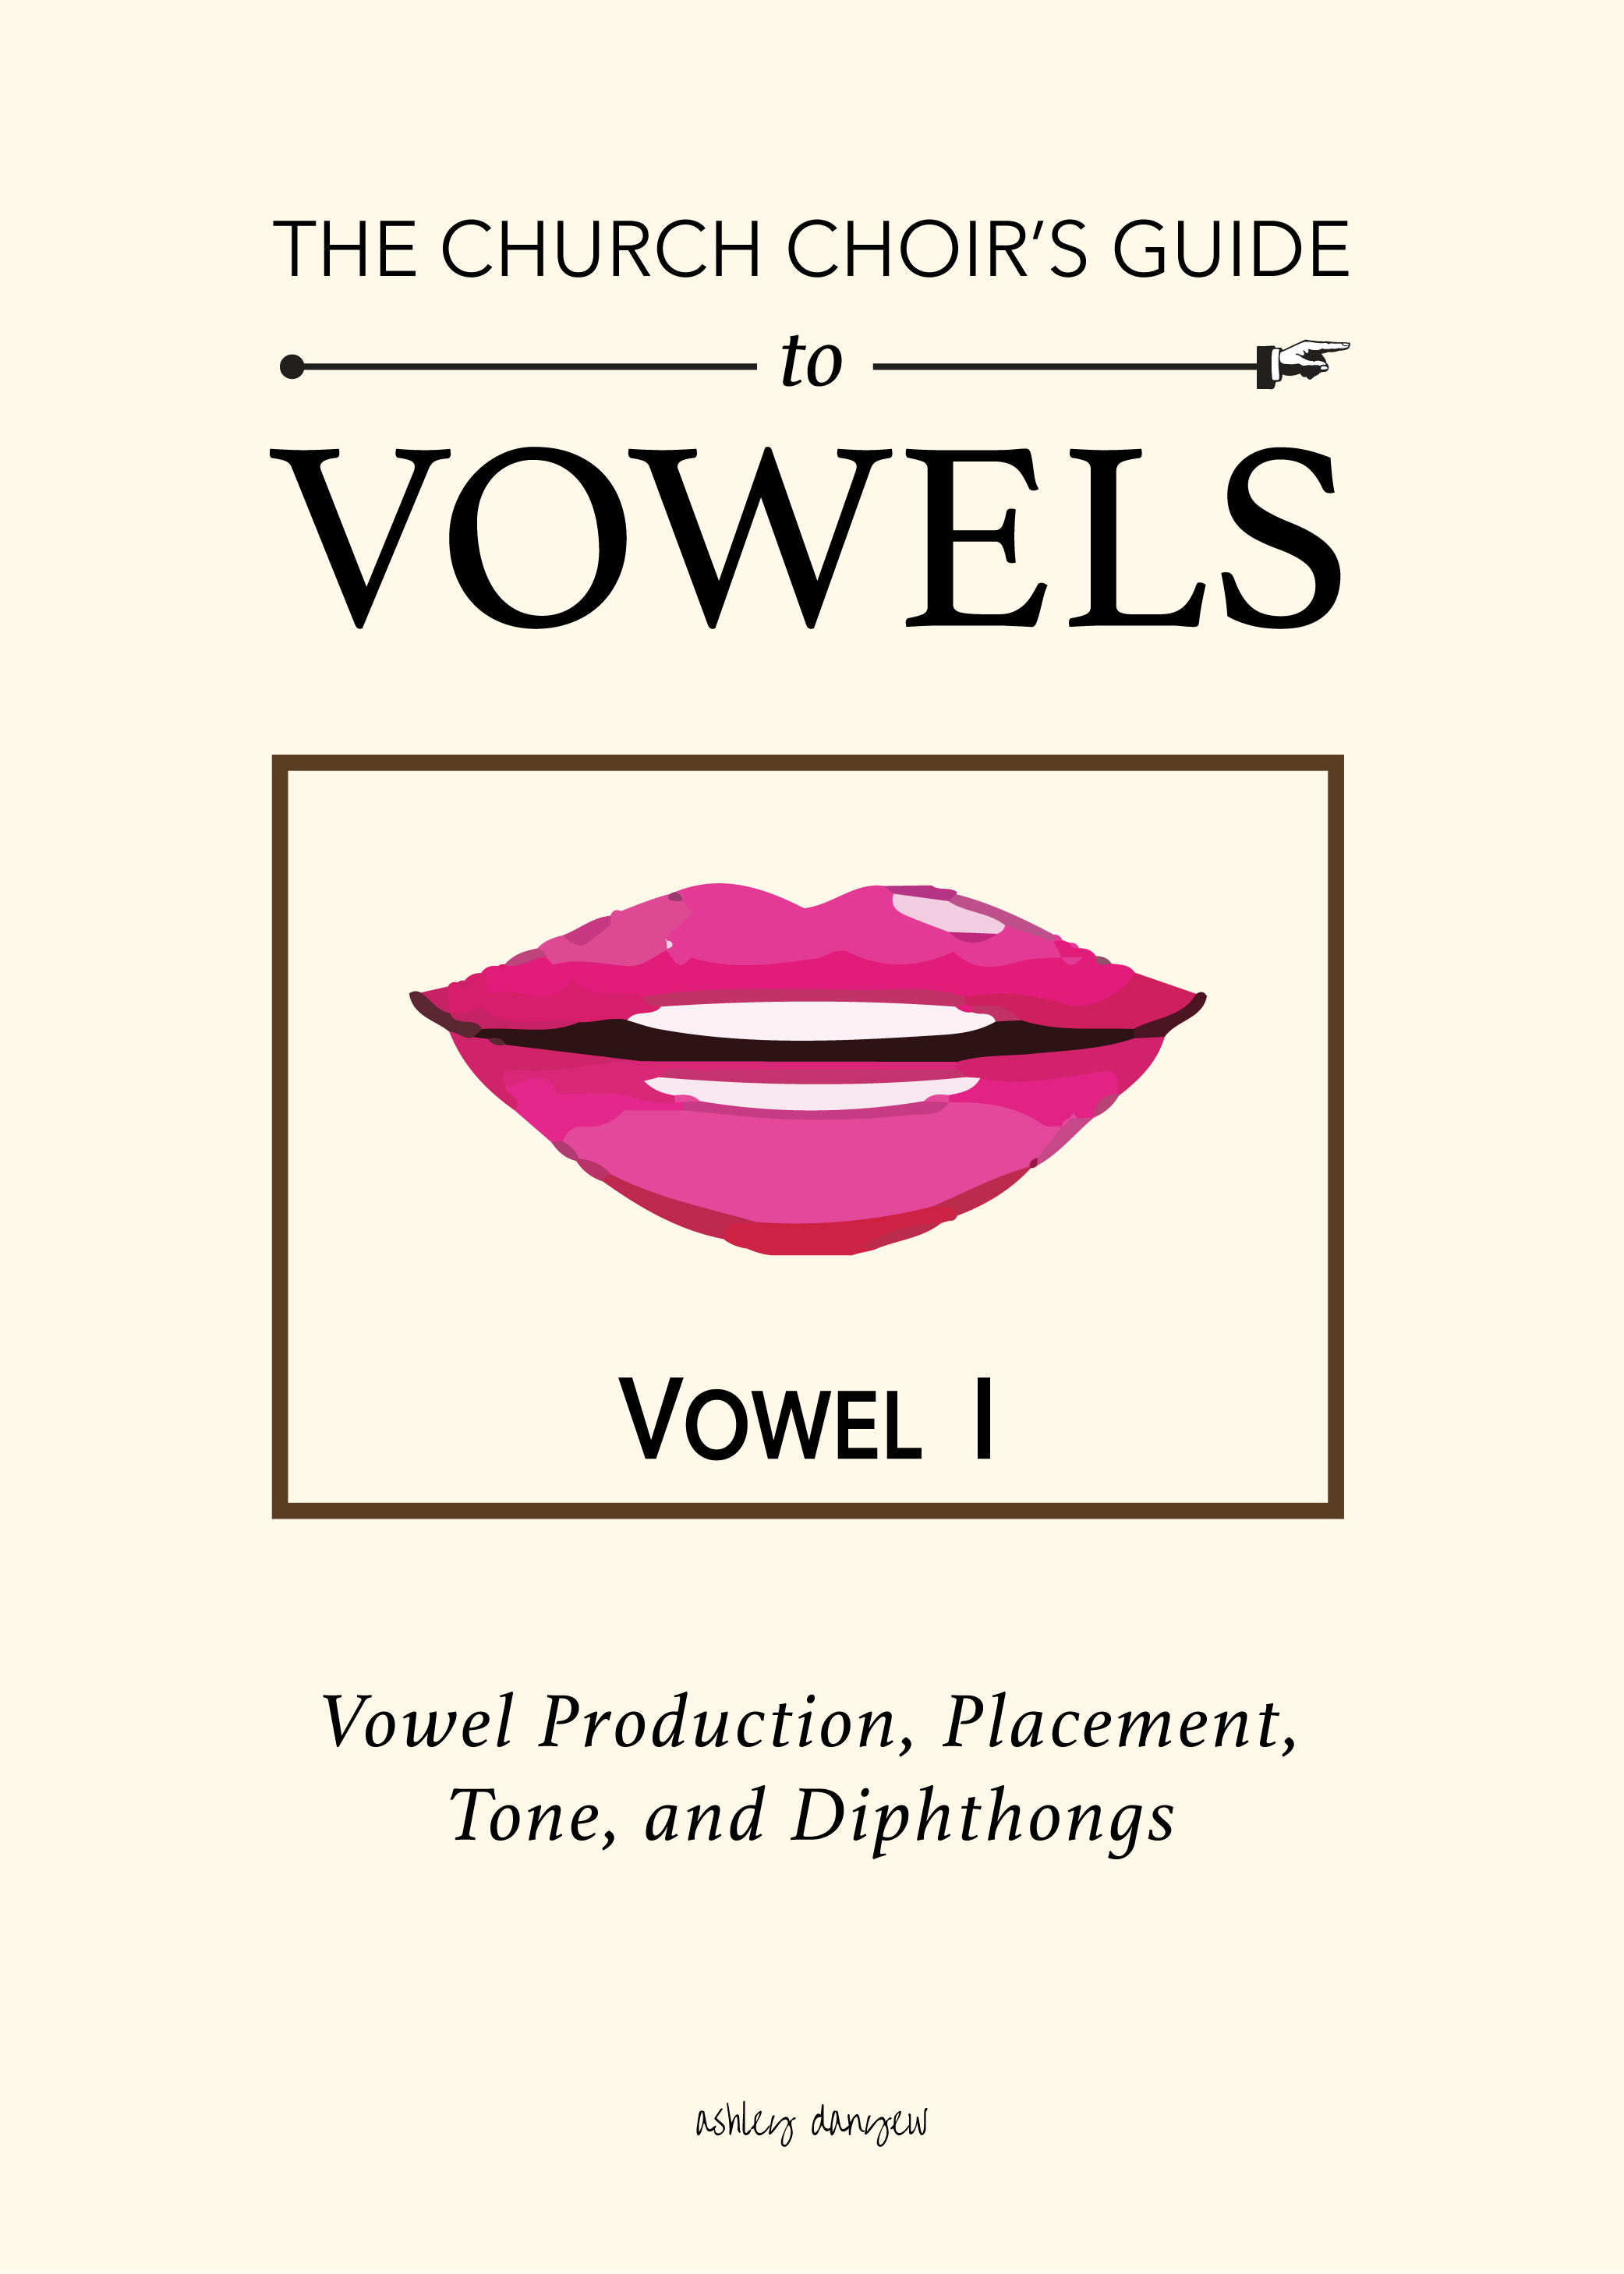 Copy of The Church Choir's Guide to Vowels - Part I